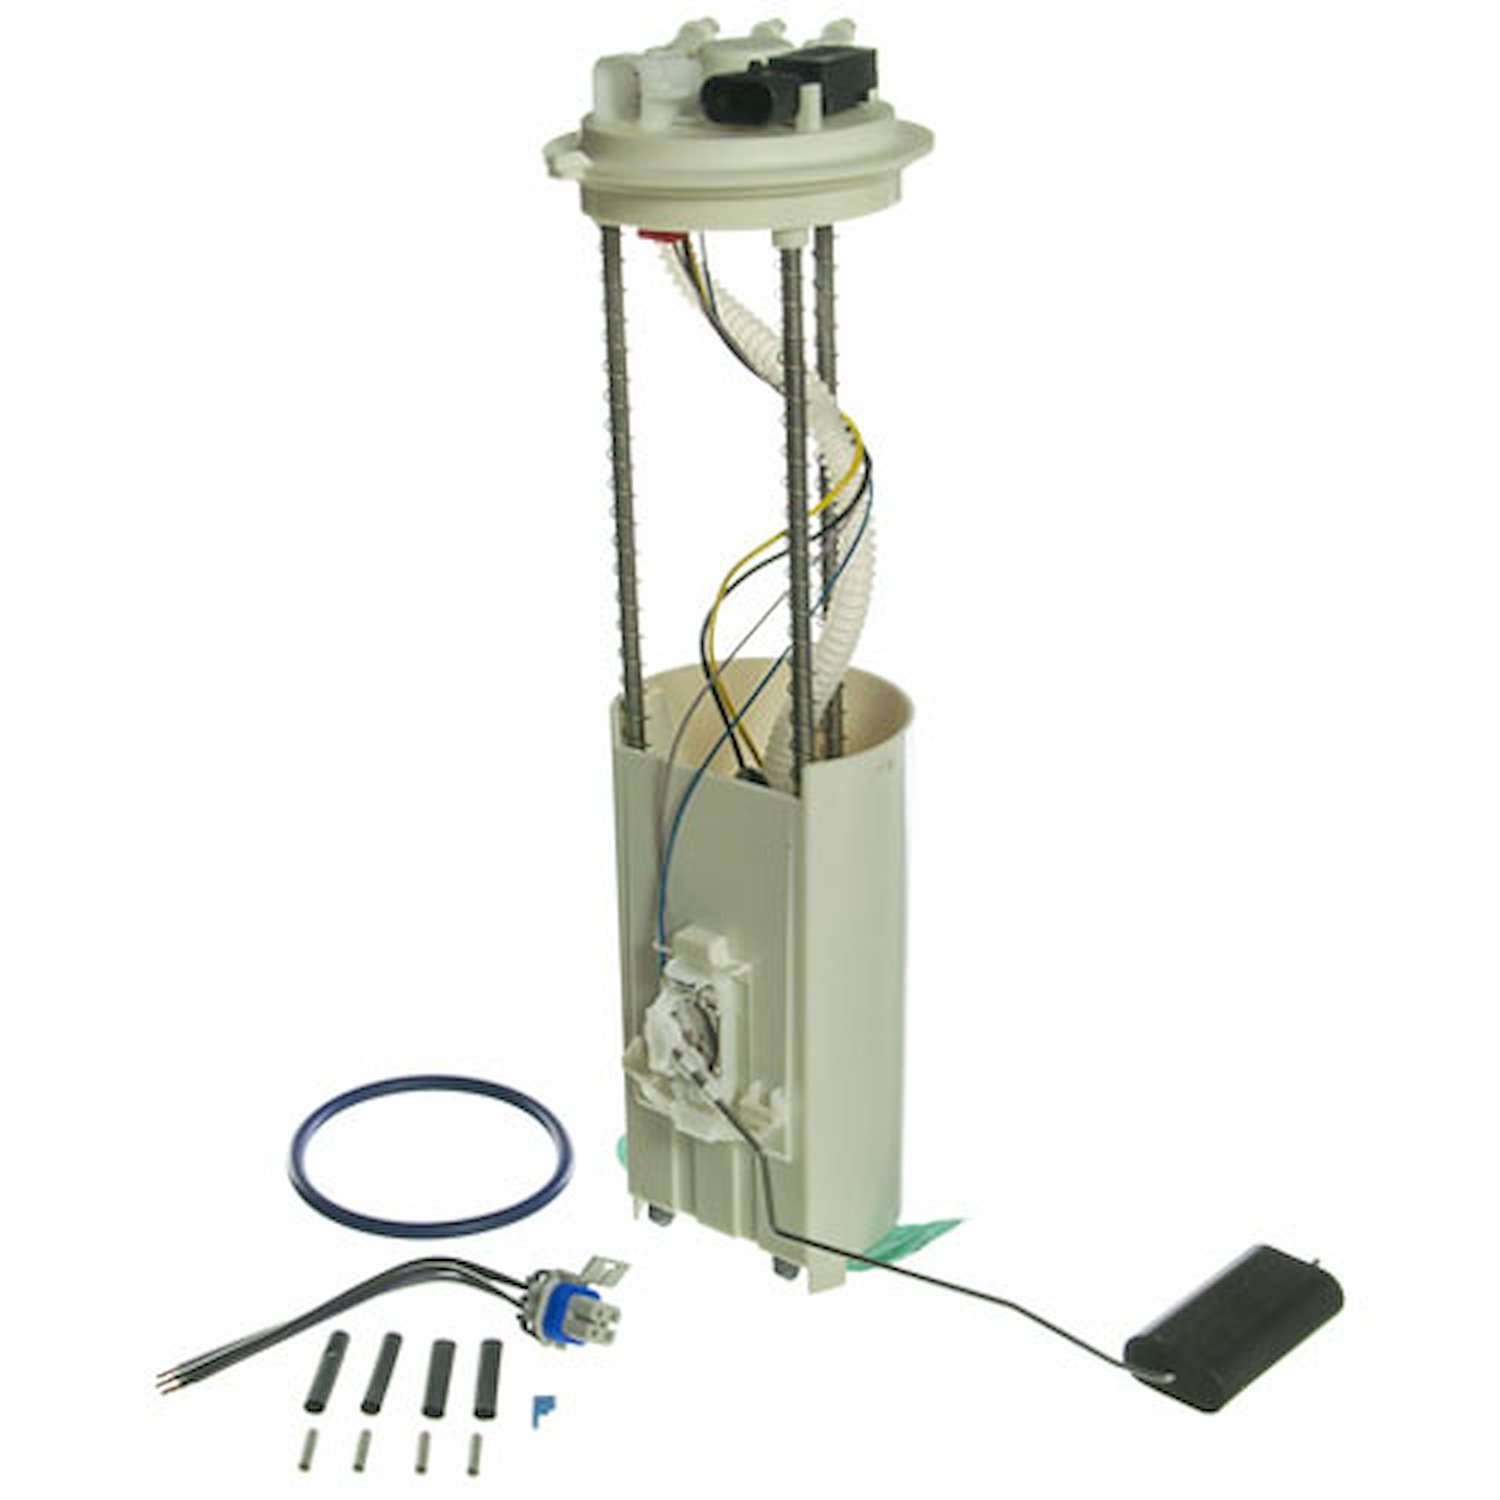 OE GM Replacement Electric Fuel Pump Module Assembly 1997-00 Chevrolet S10 2.2L 4 Cyl